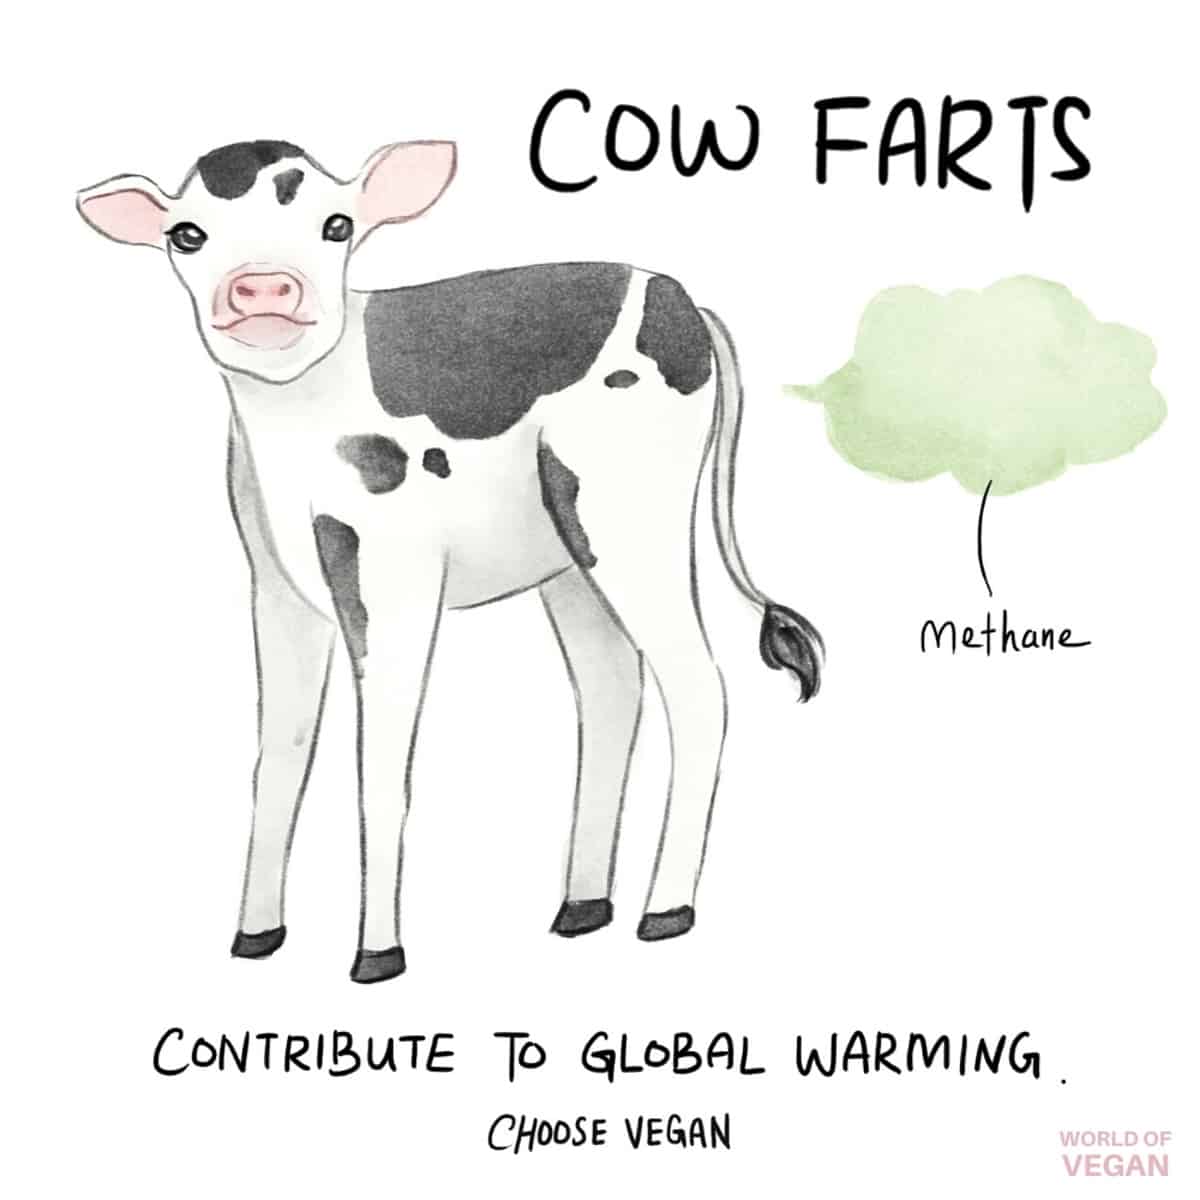 Vegan art comic illustration showing a cute baby cow fart contributing to global warming. 